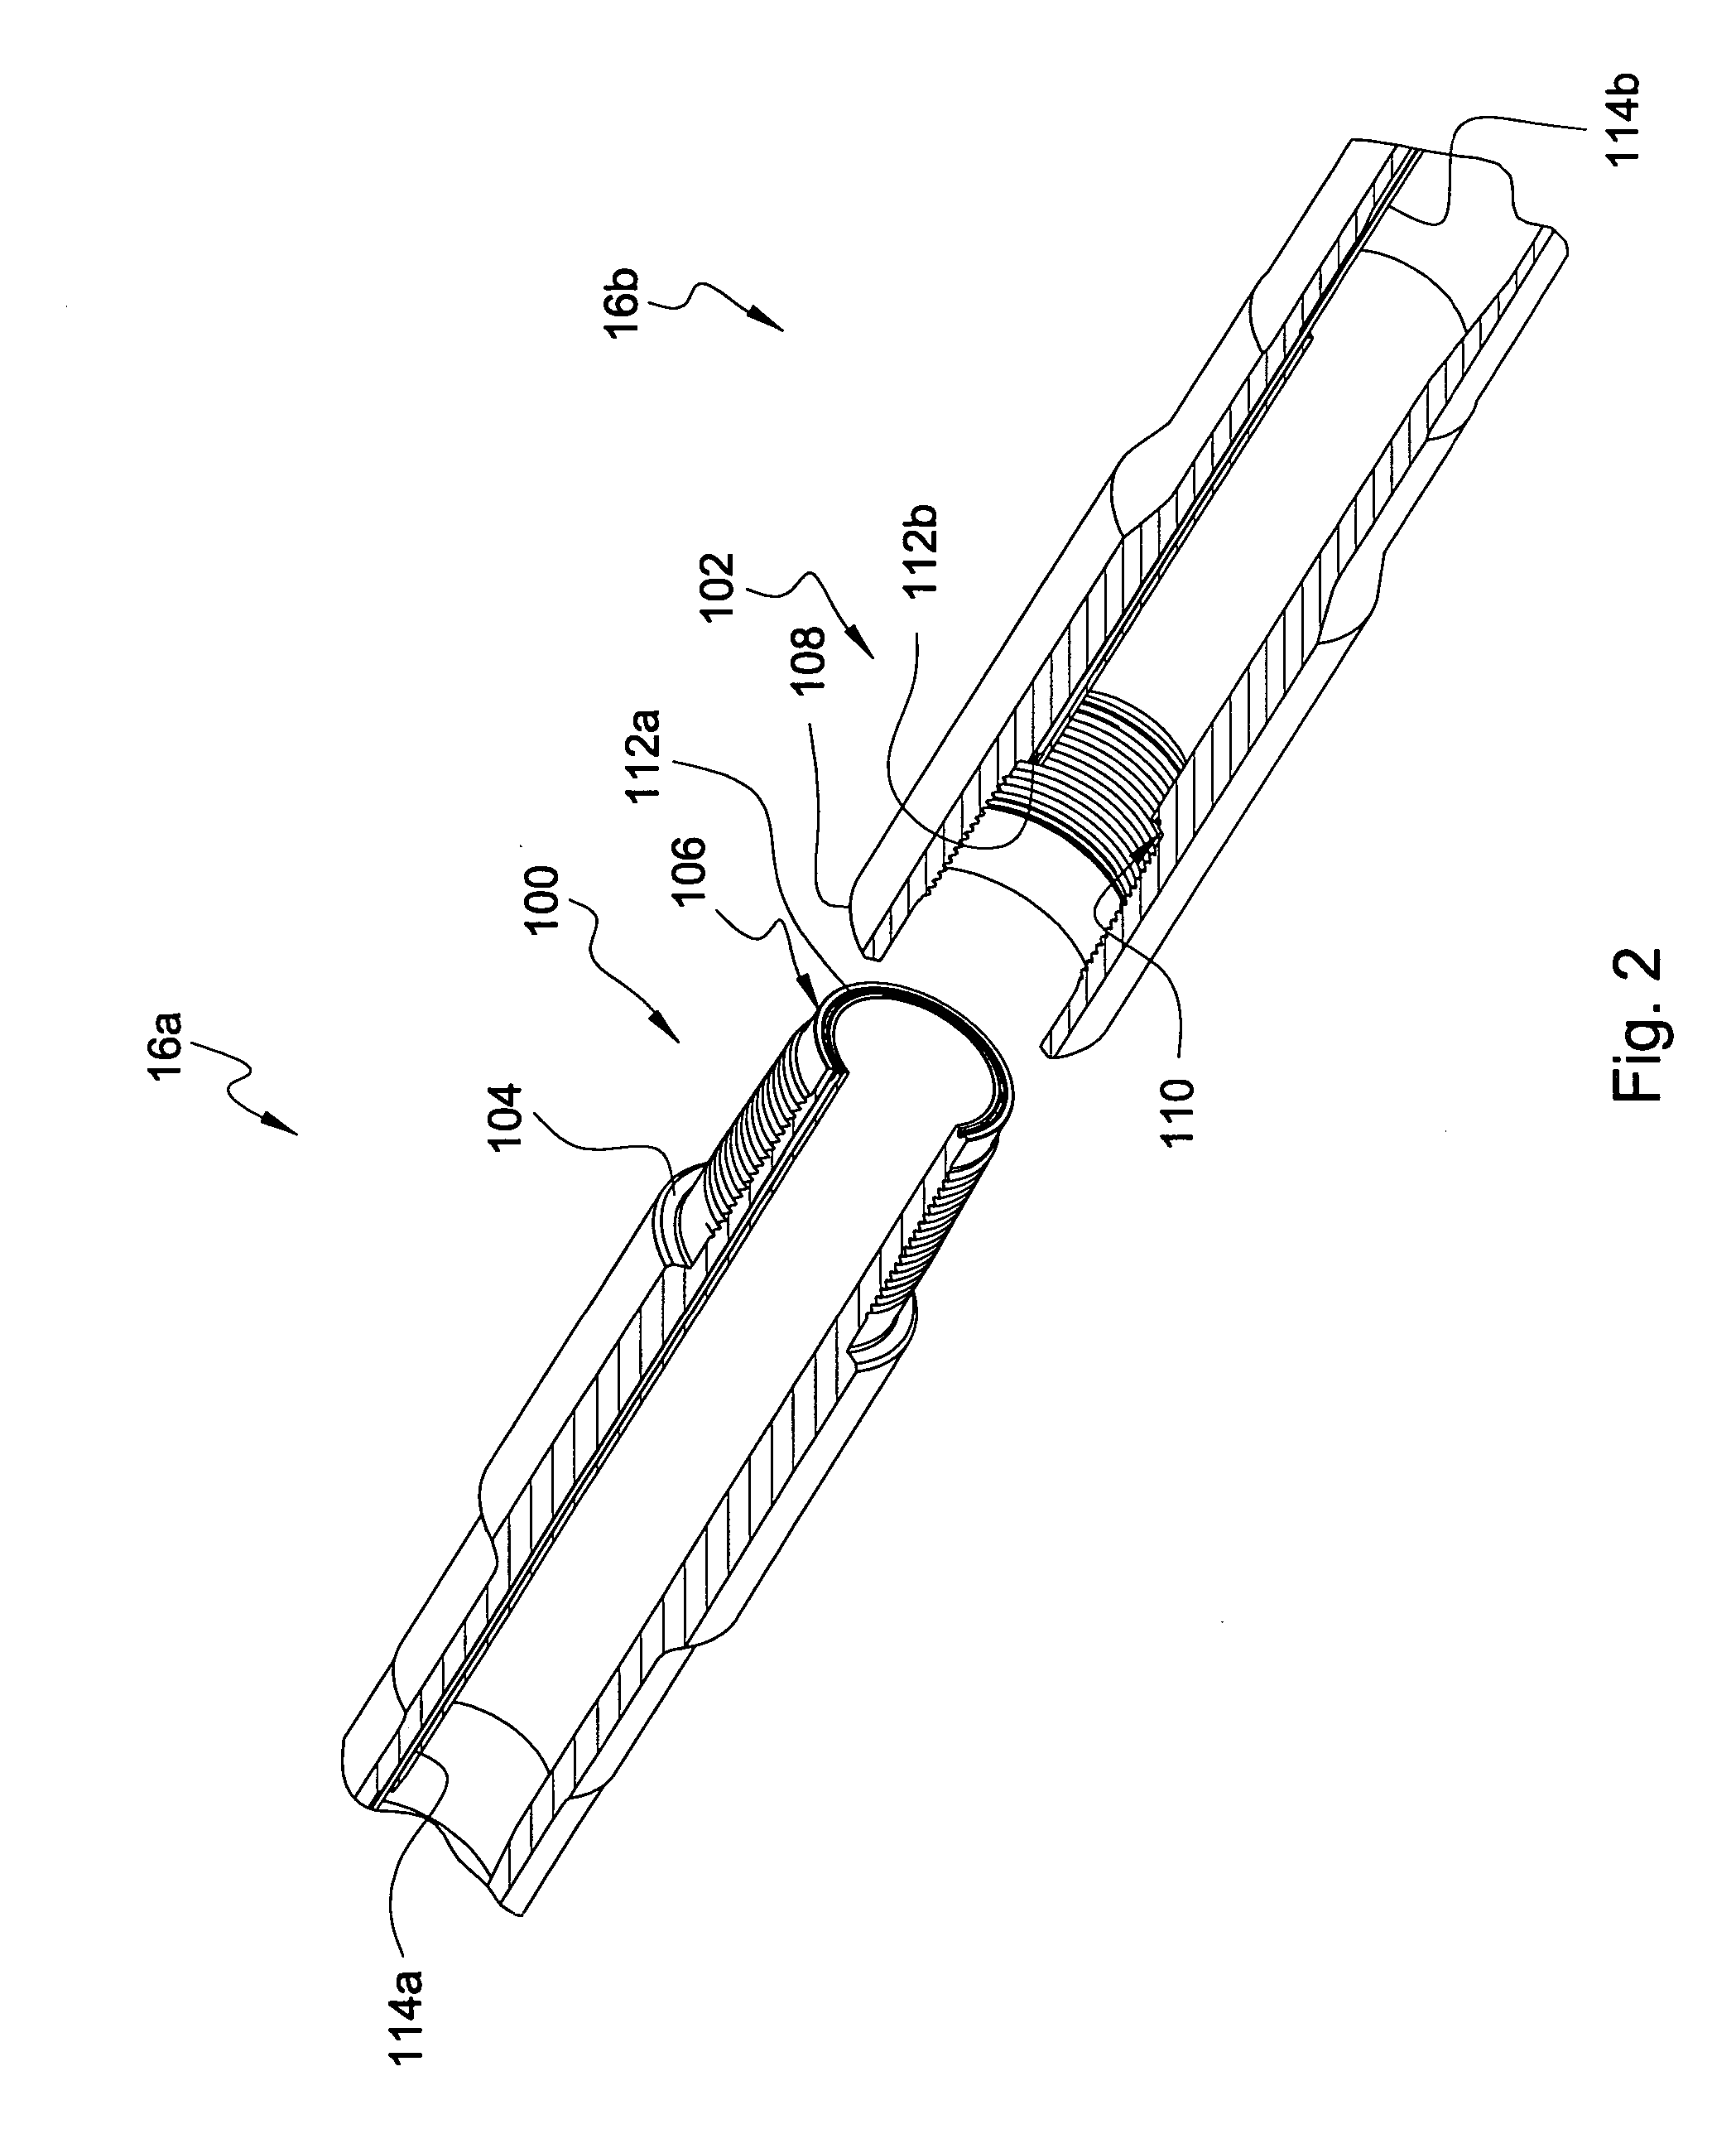 Method and system for cooling electrical components downhole